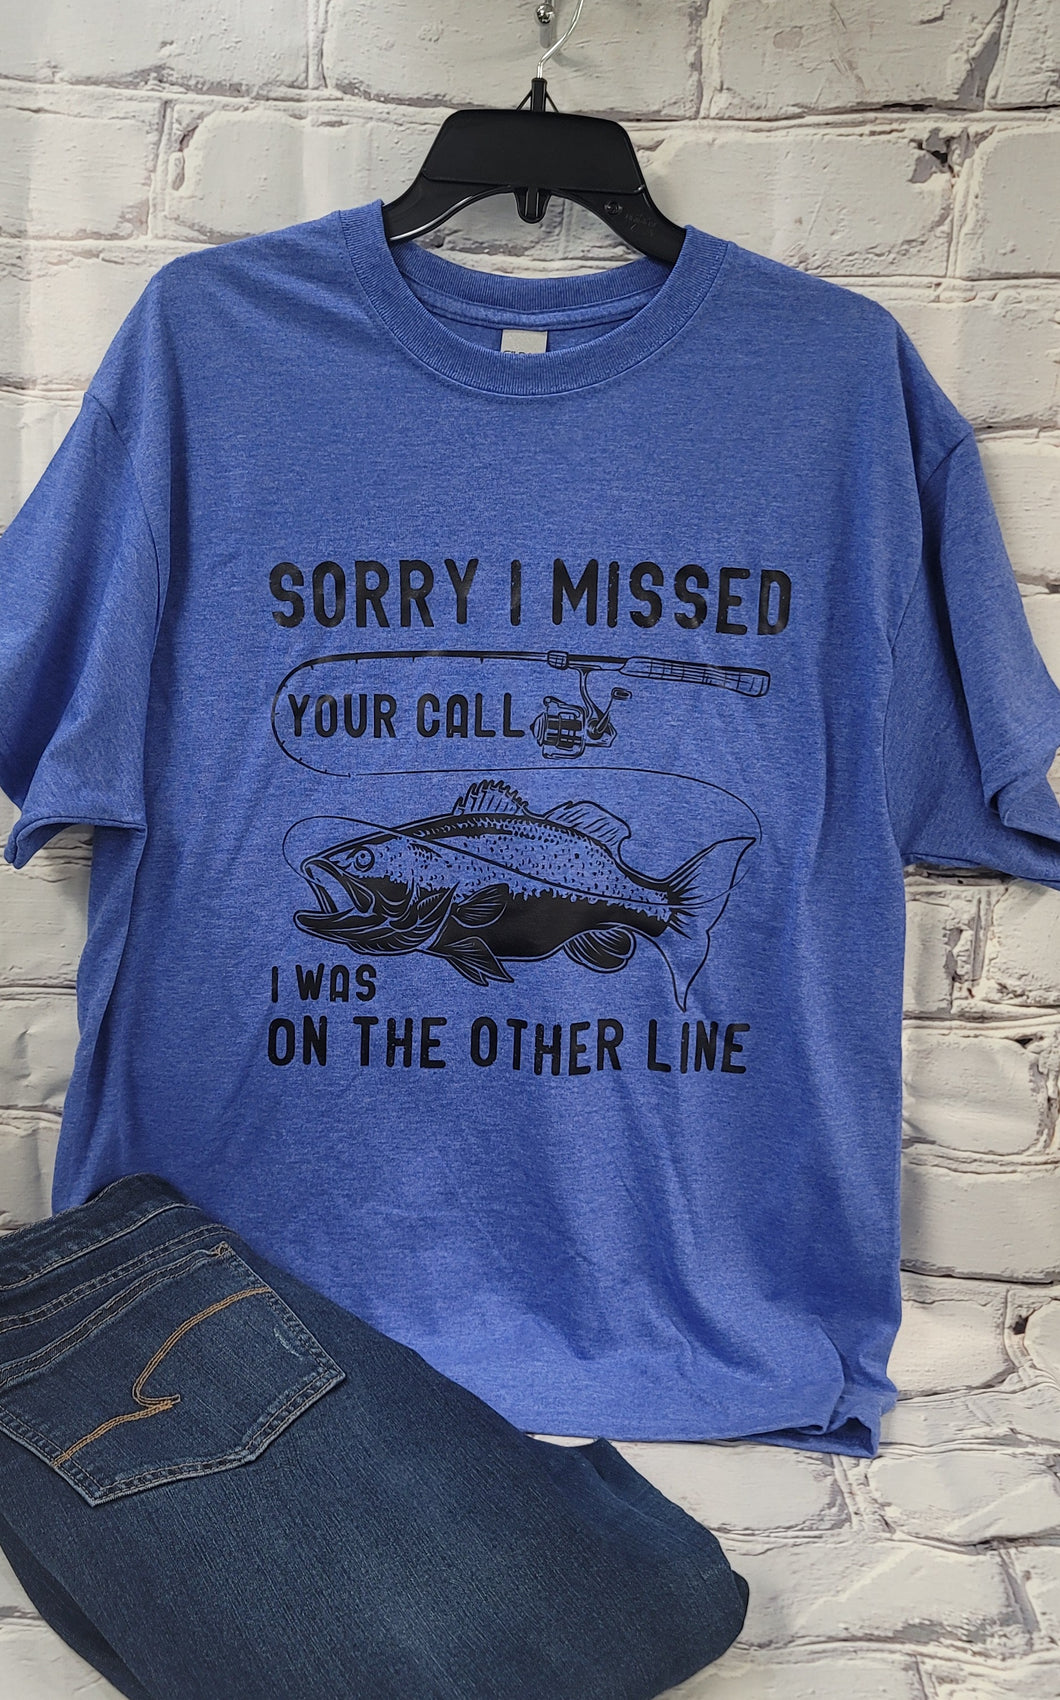 Sorry I Missed Your Call, I was on the Other Line Men's Shirt